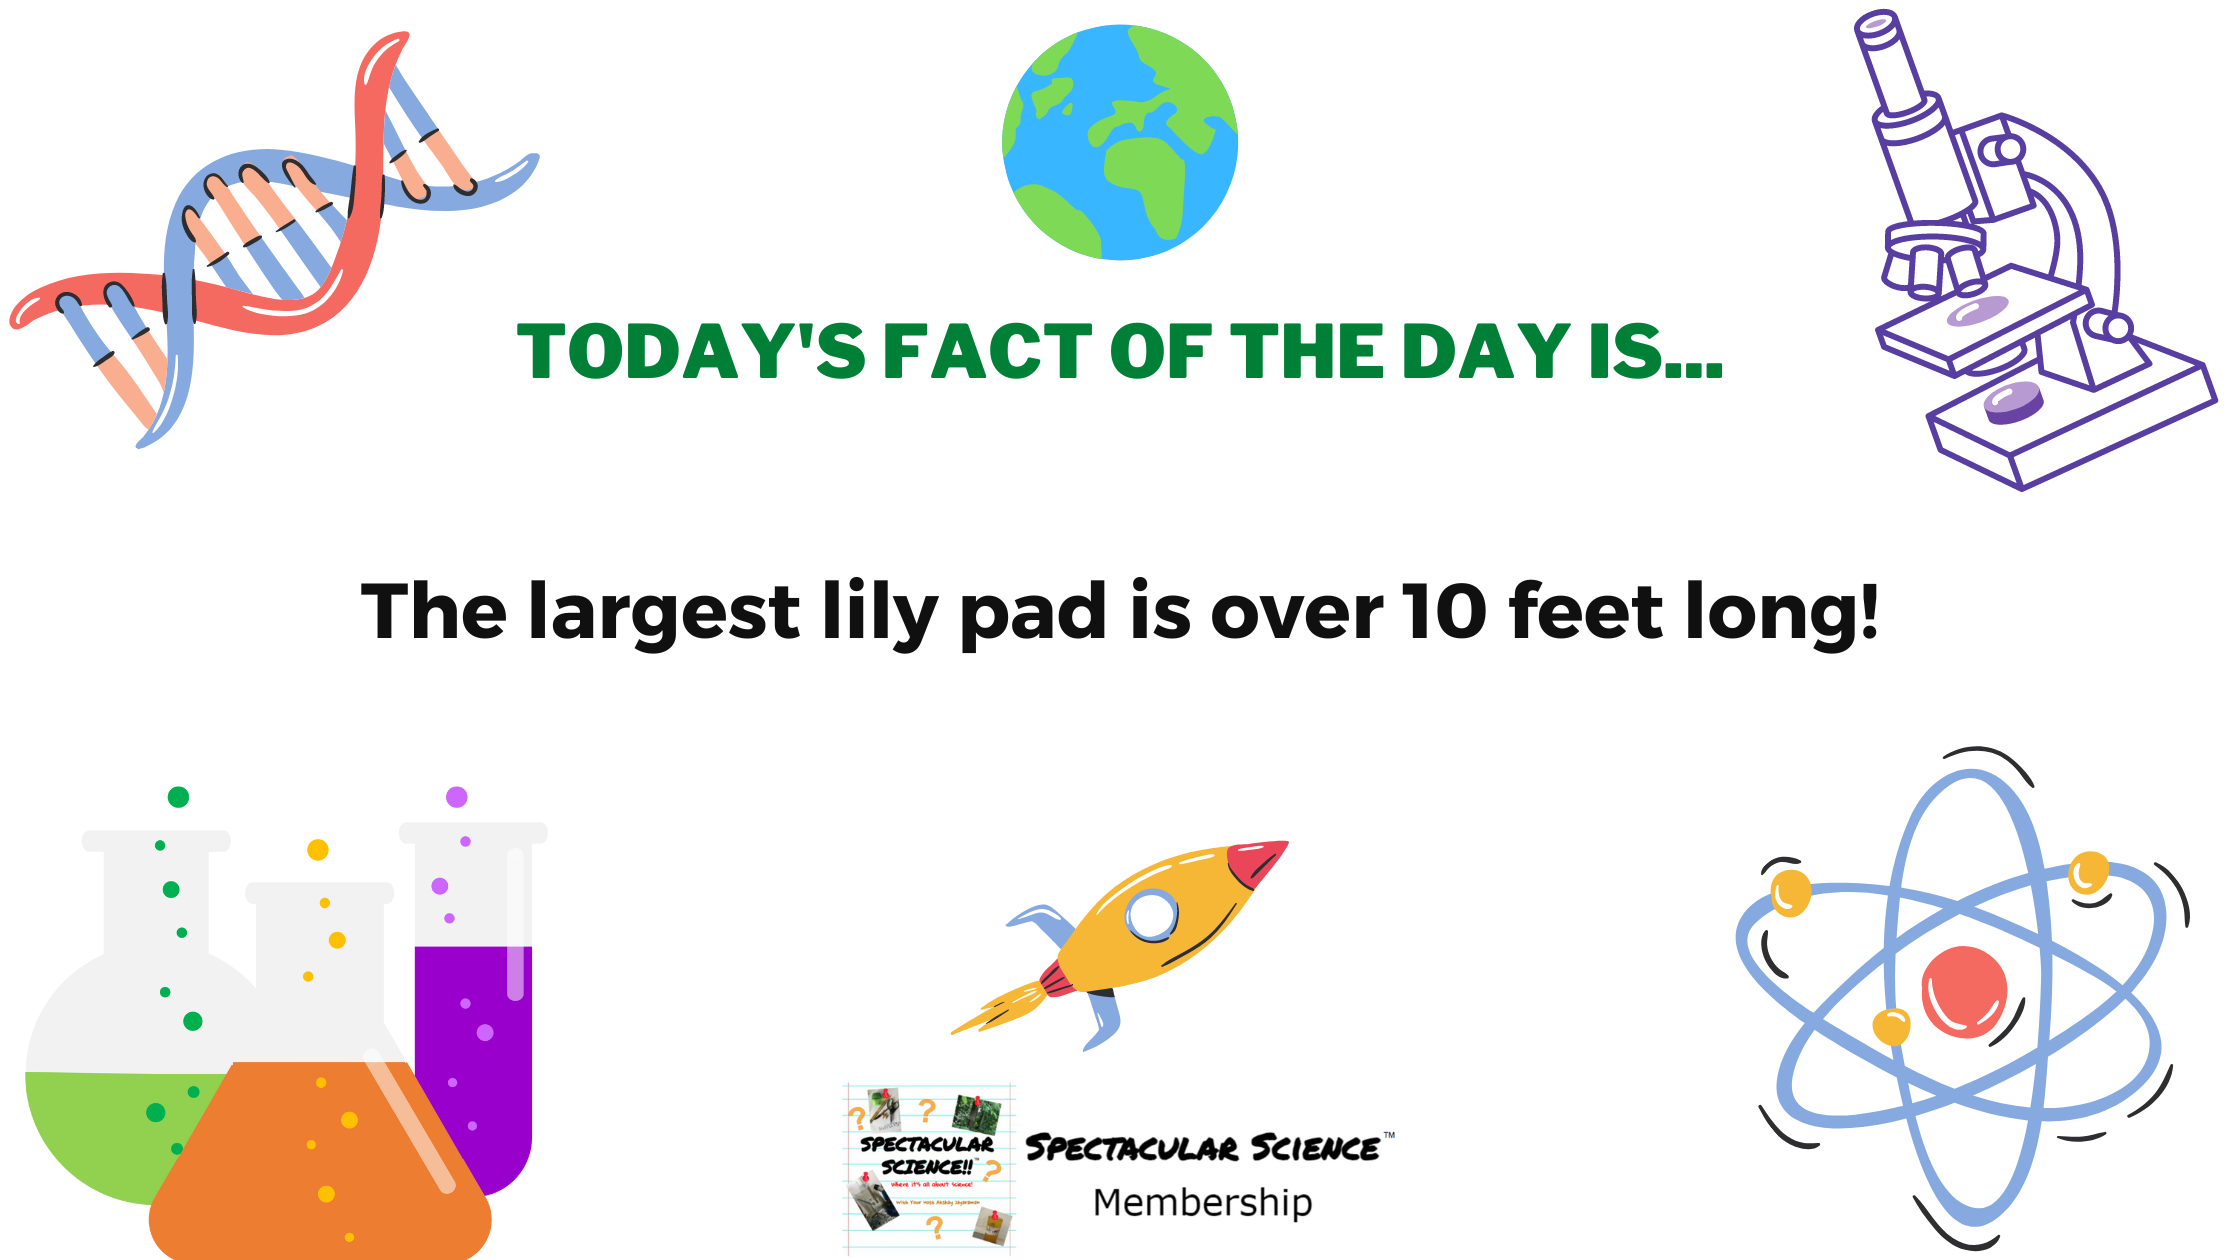 Fact of the Day Image September 13th